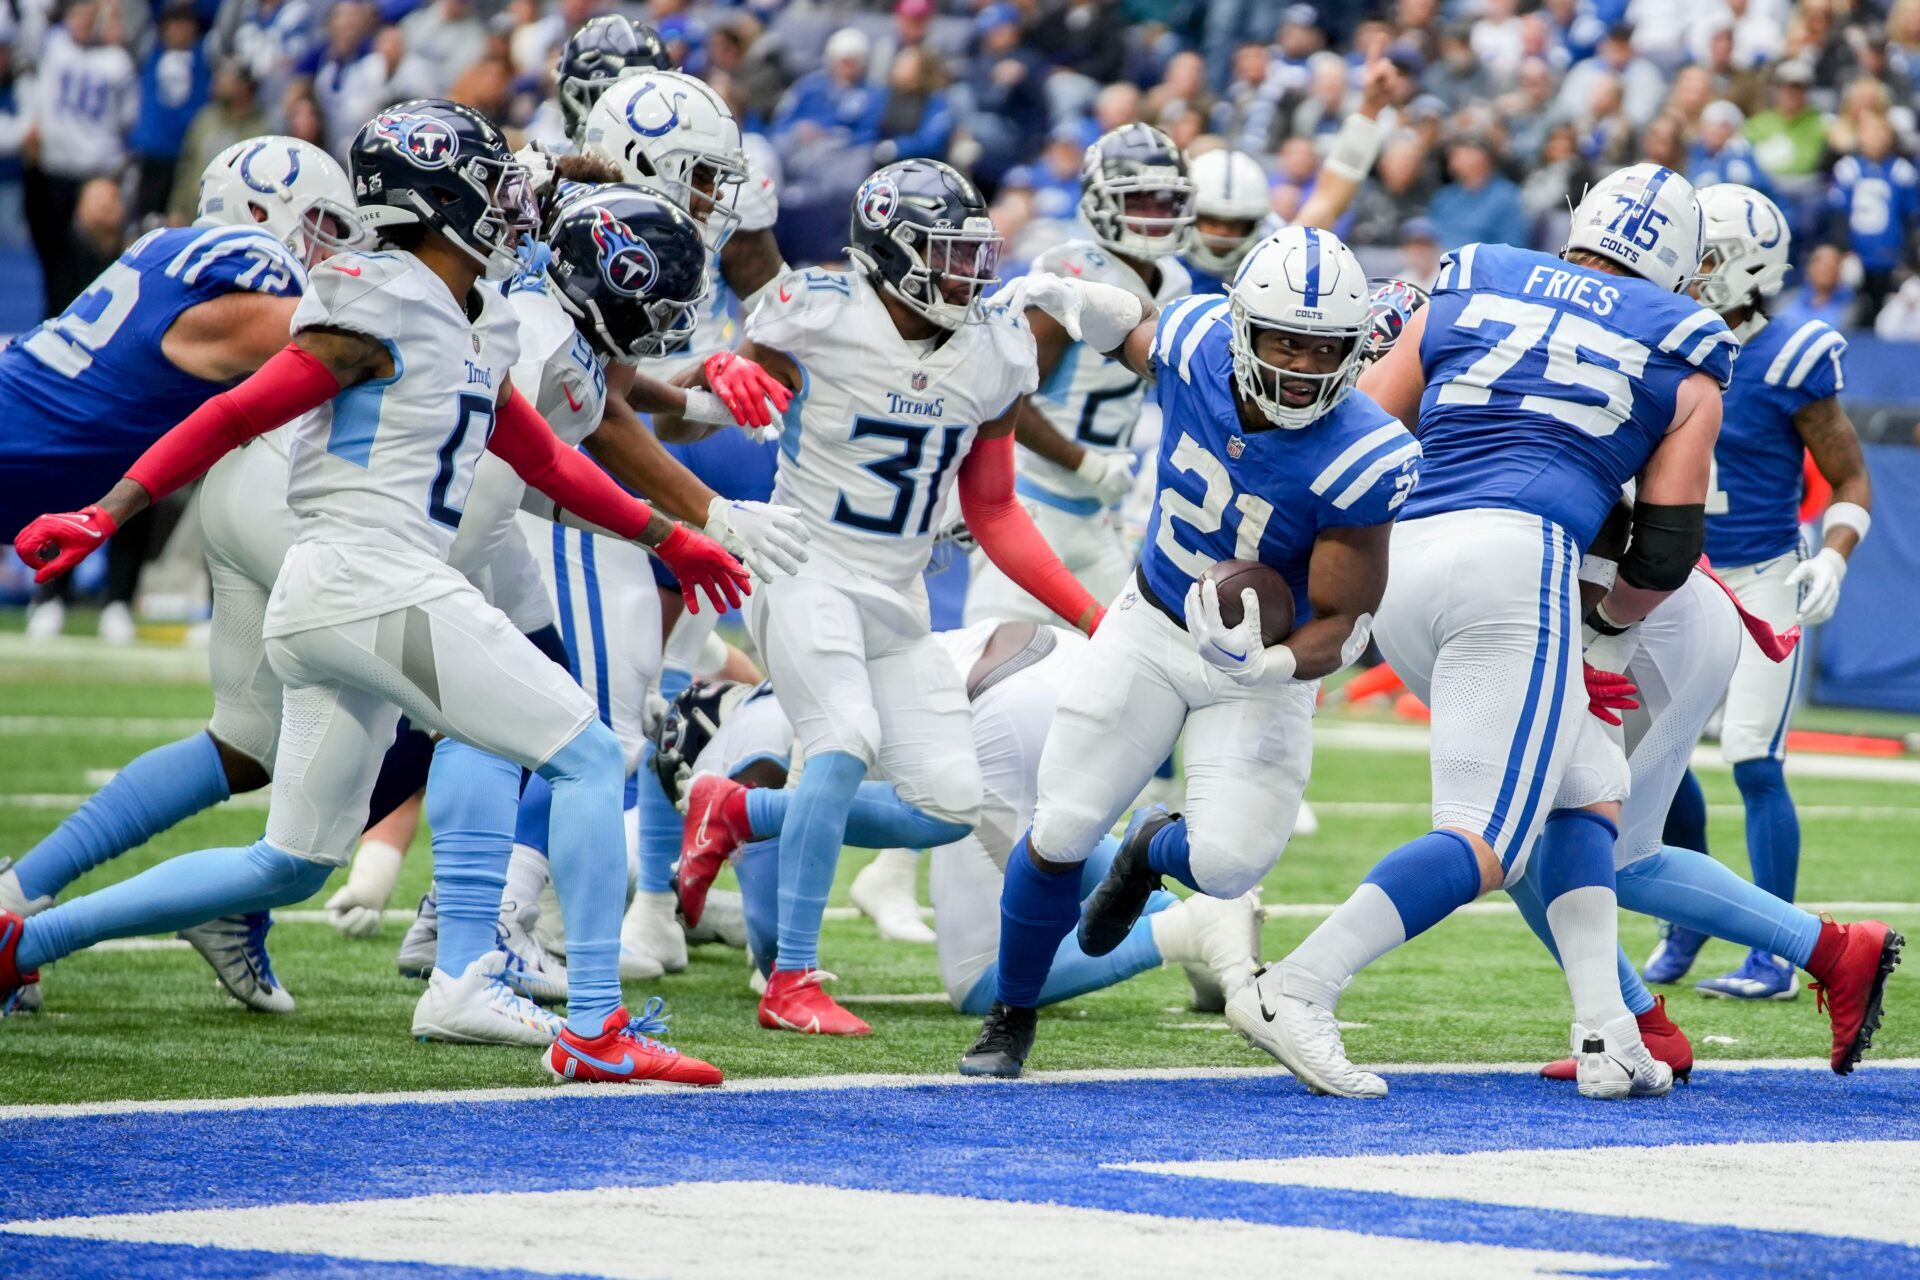 Colts vs. Cowboys: Colts collapse, hit rock bottom in blowout loss